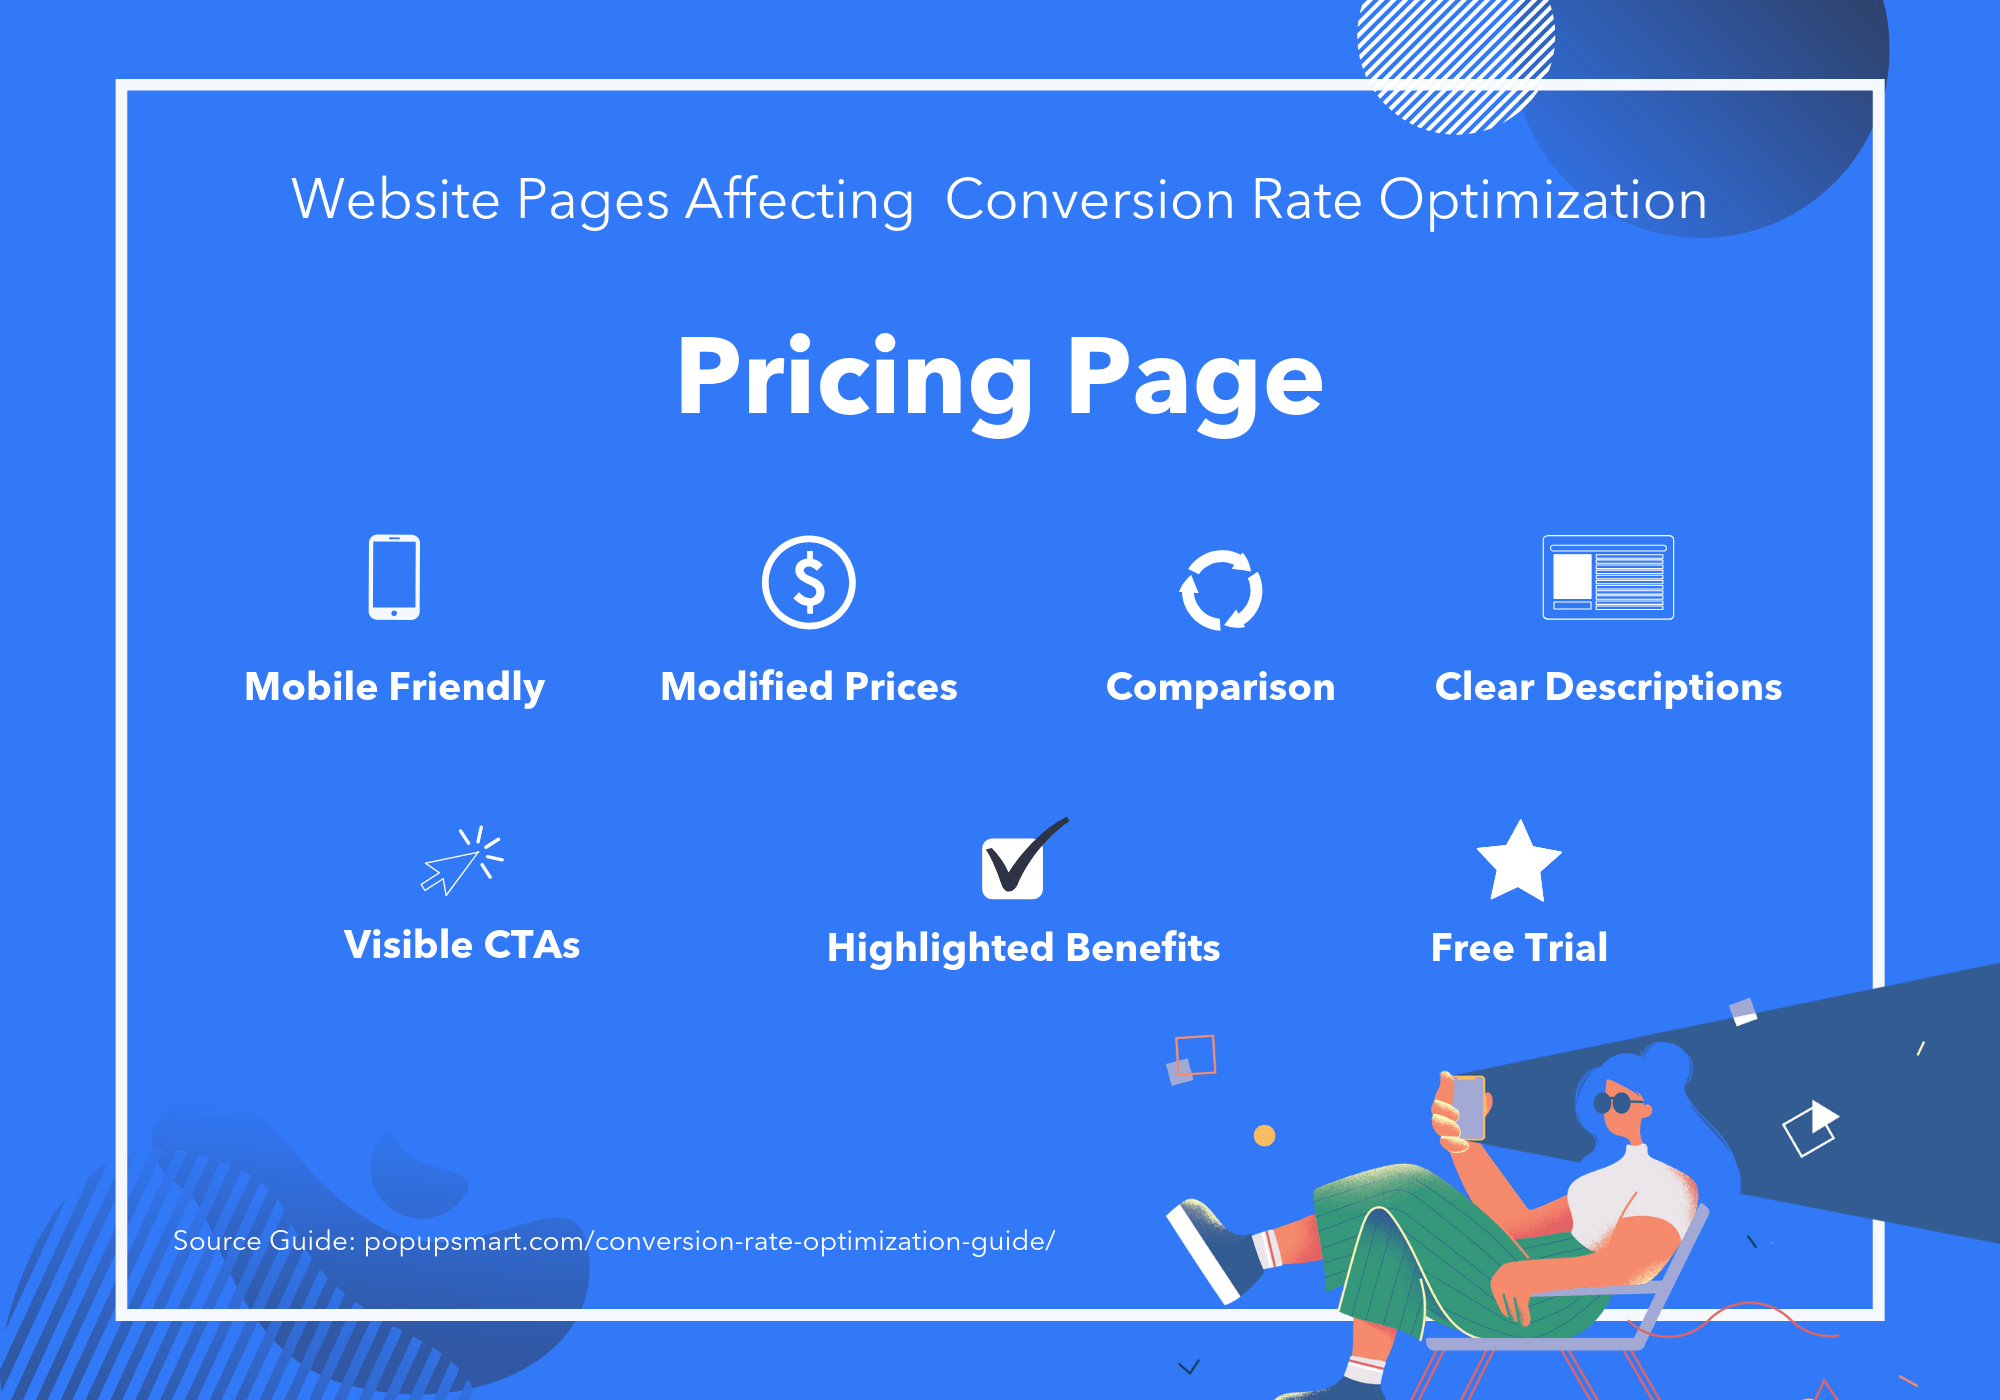 Webpages for Conversion Rate Optimization: Pricing Page